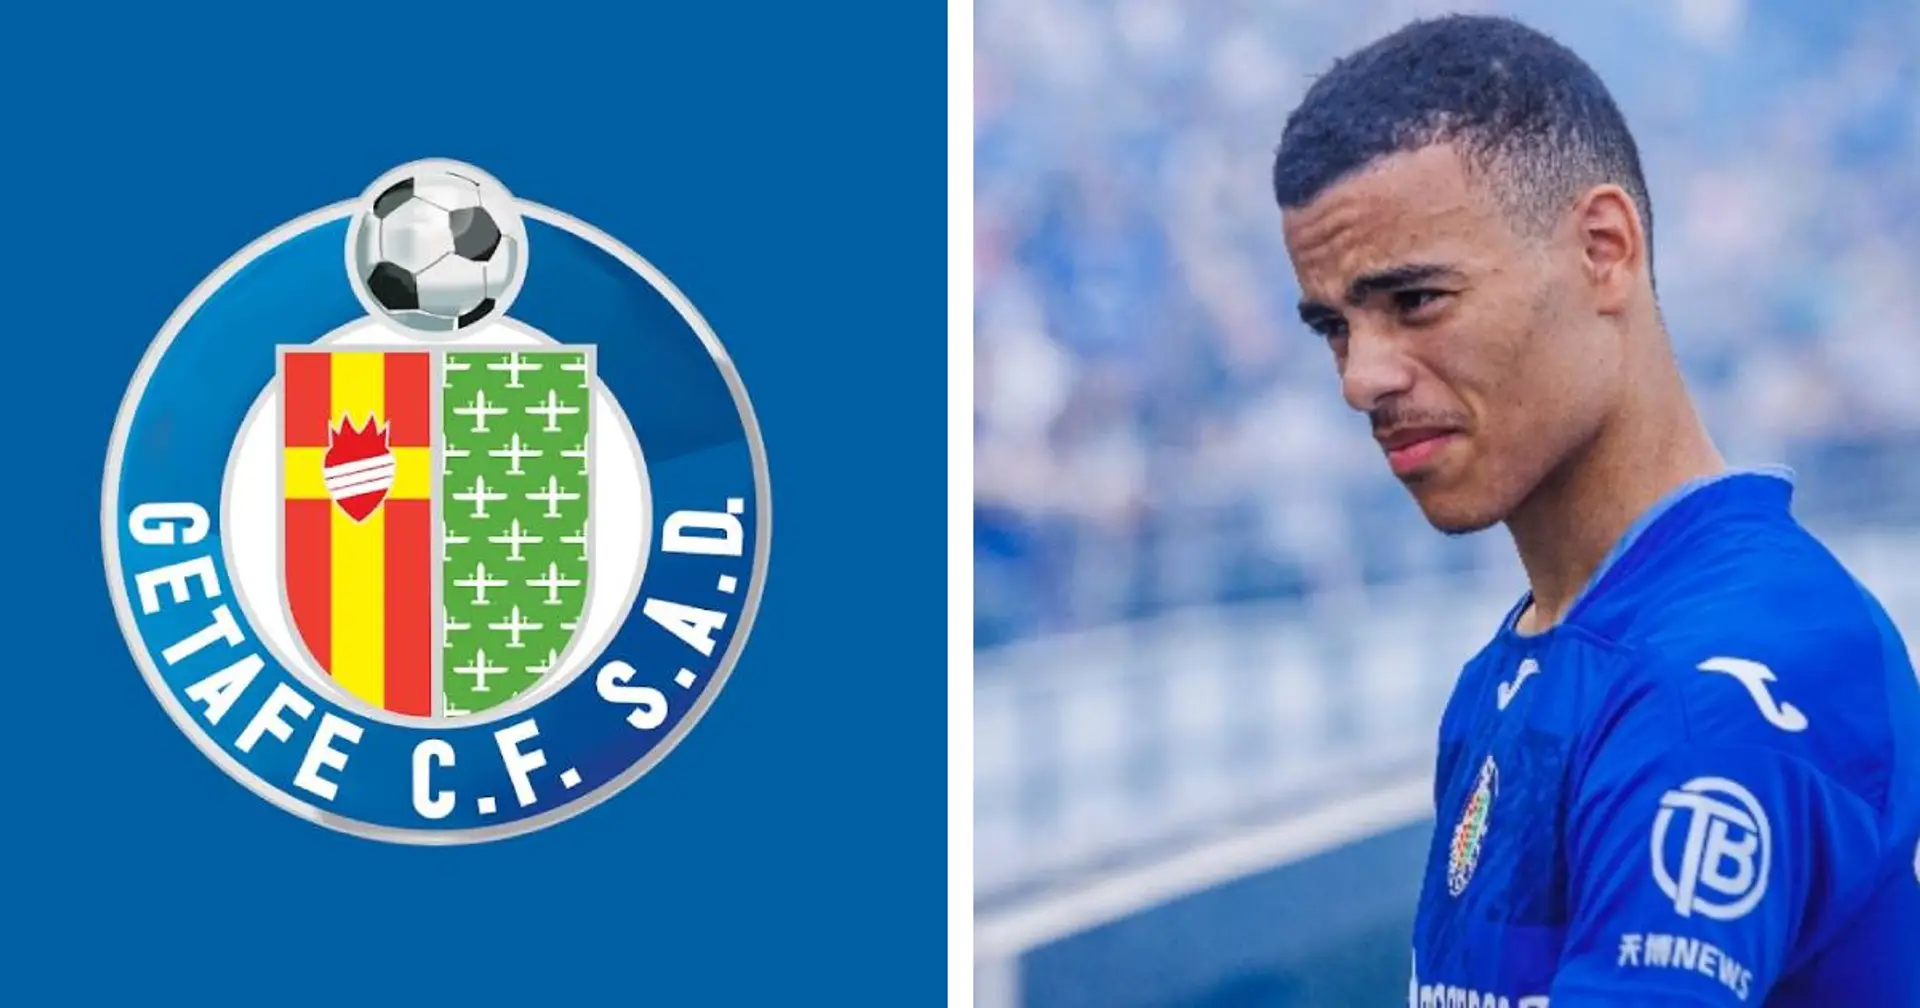 Getafe issue statement after fans chant 'die' aimed at Mason Greenwood